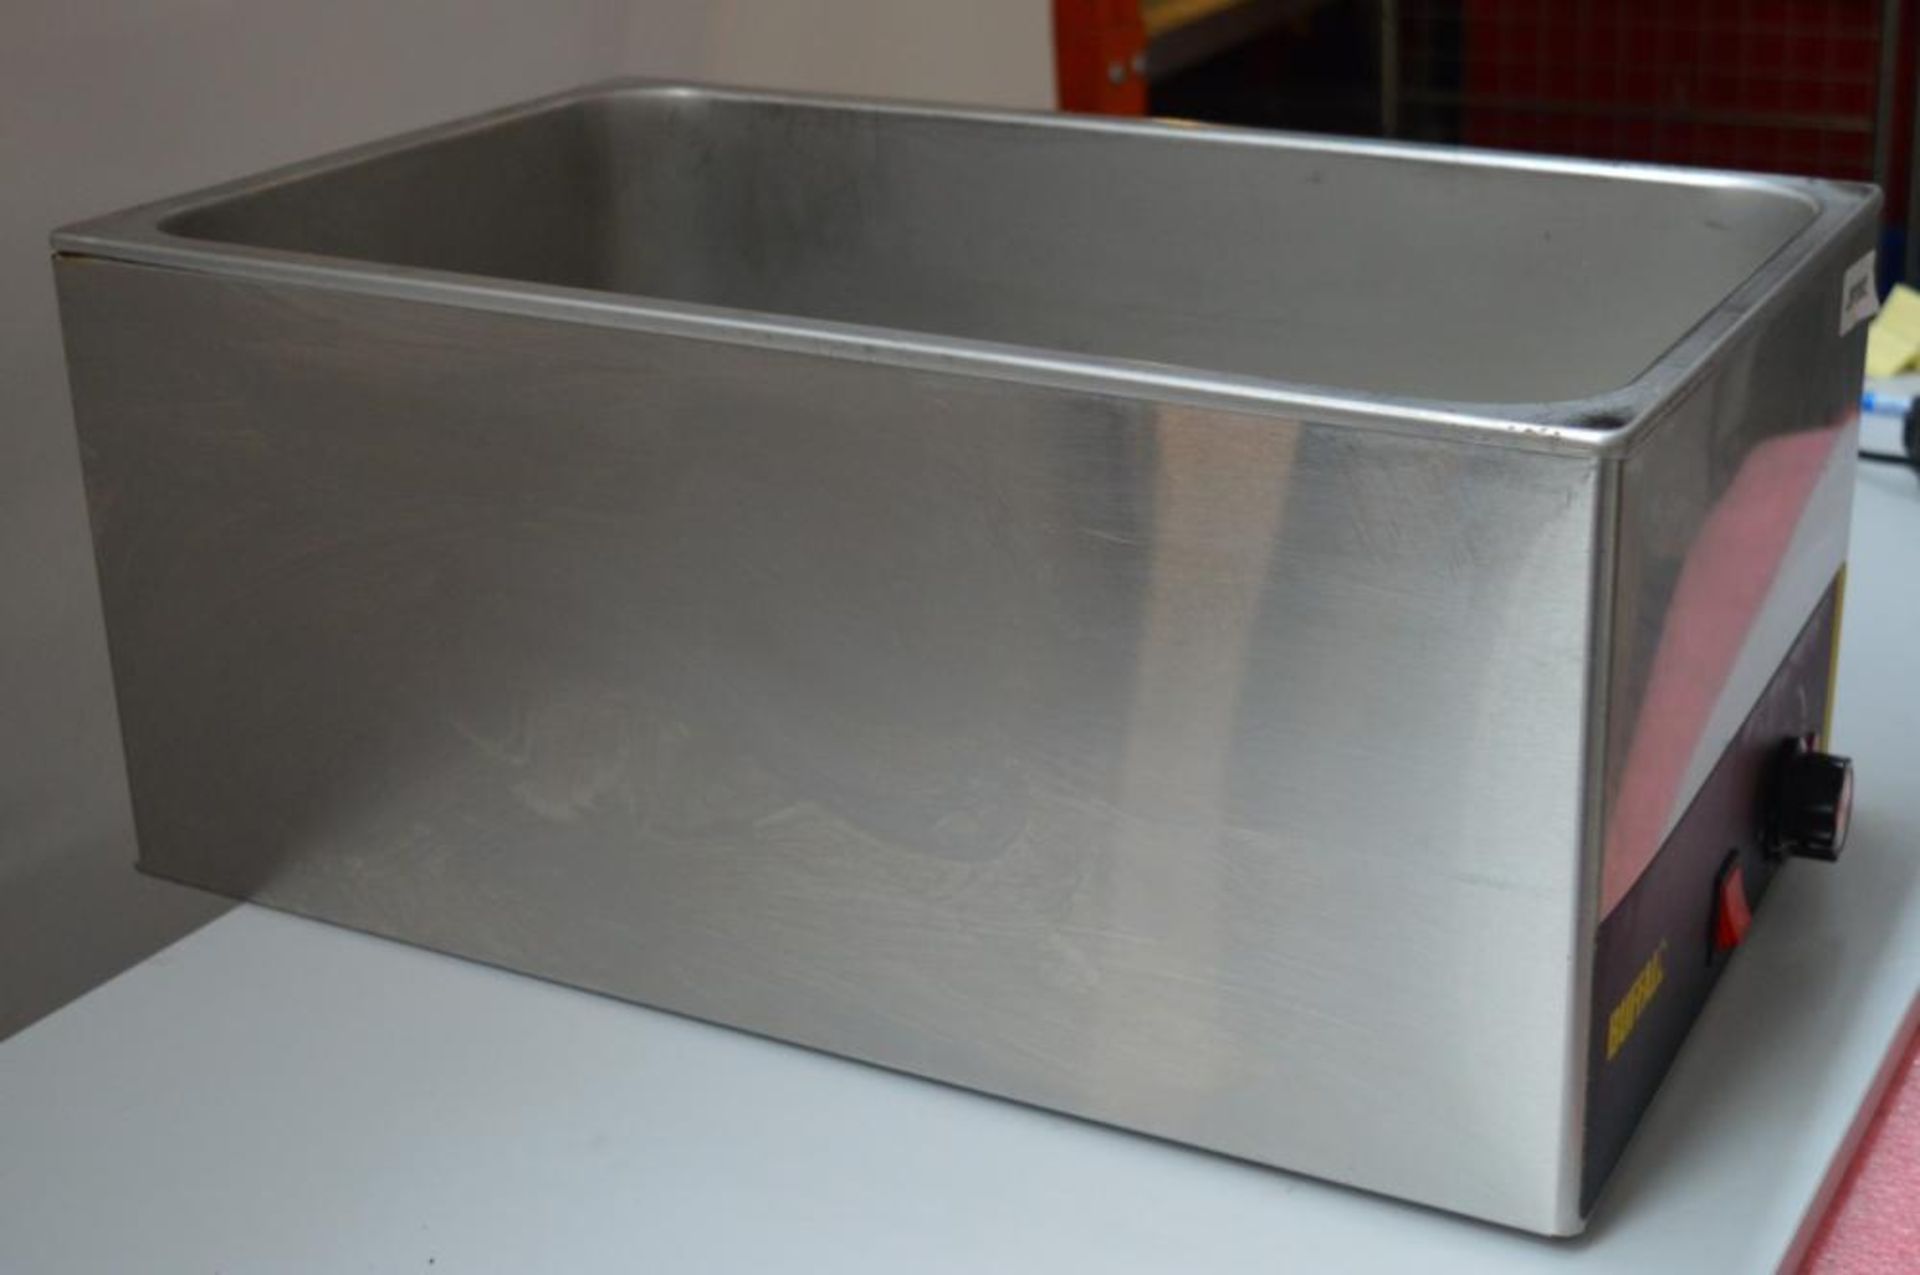 1 x Buffalo Stainless Steel Baine Marie - Model L371B - H24 x W34 x D54 cms - CL290 - Ref JP382 - - Image 5 of 7